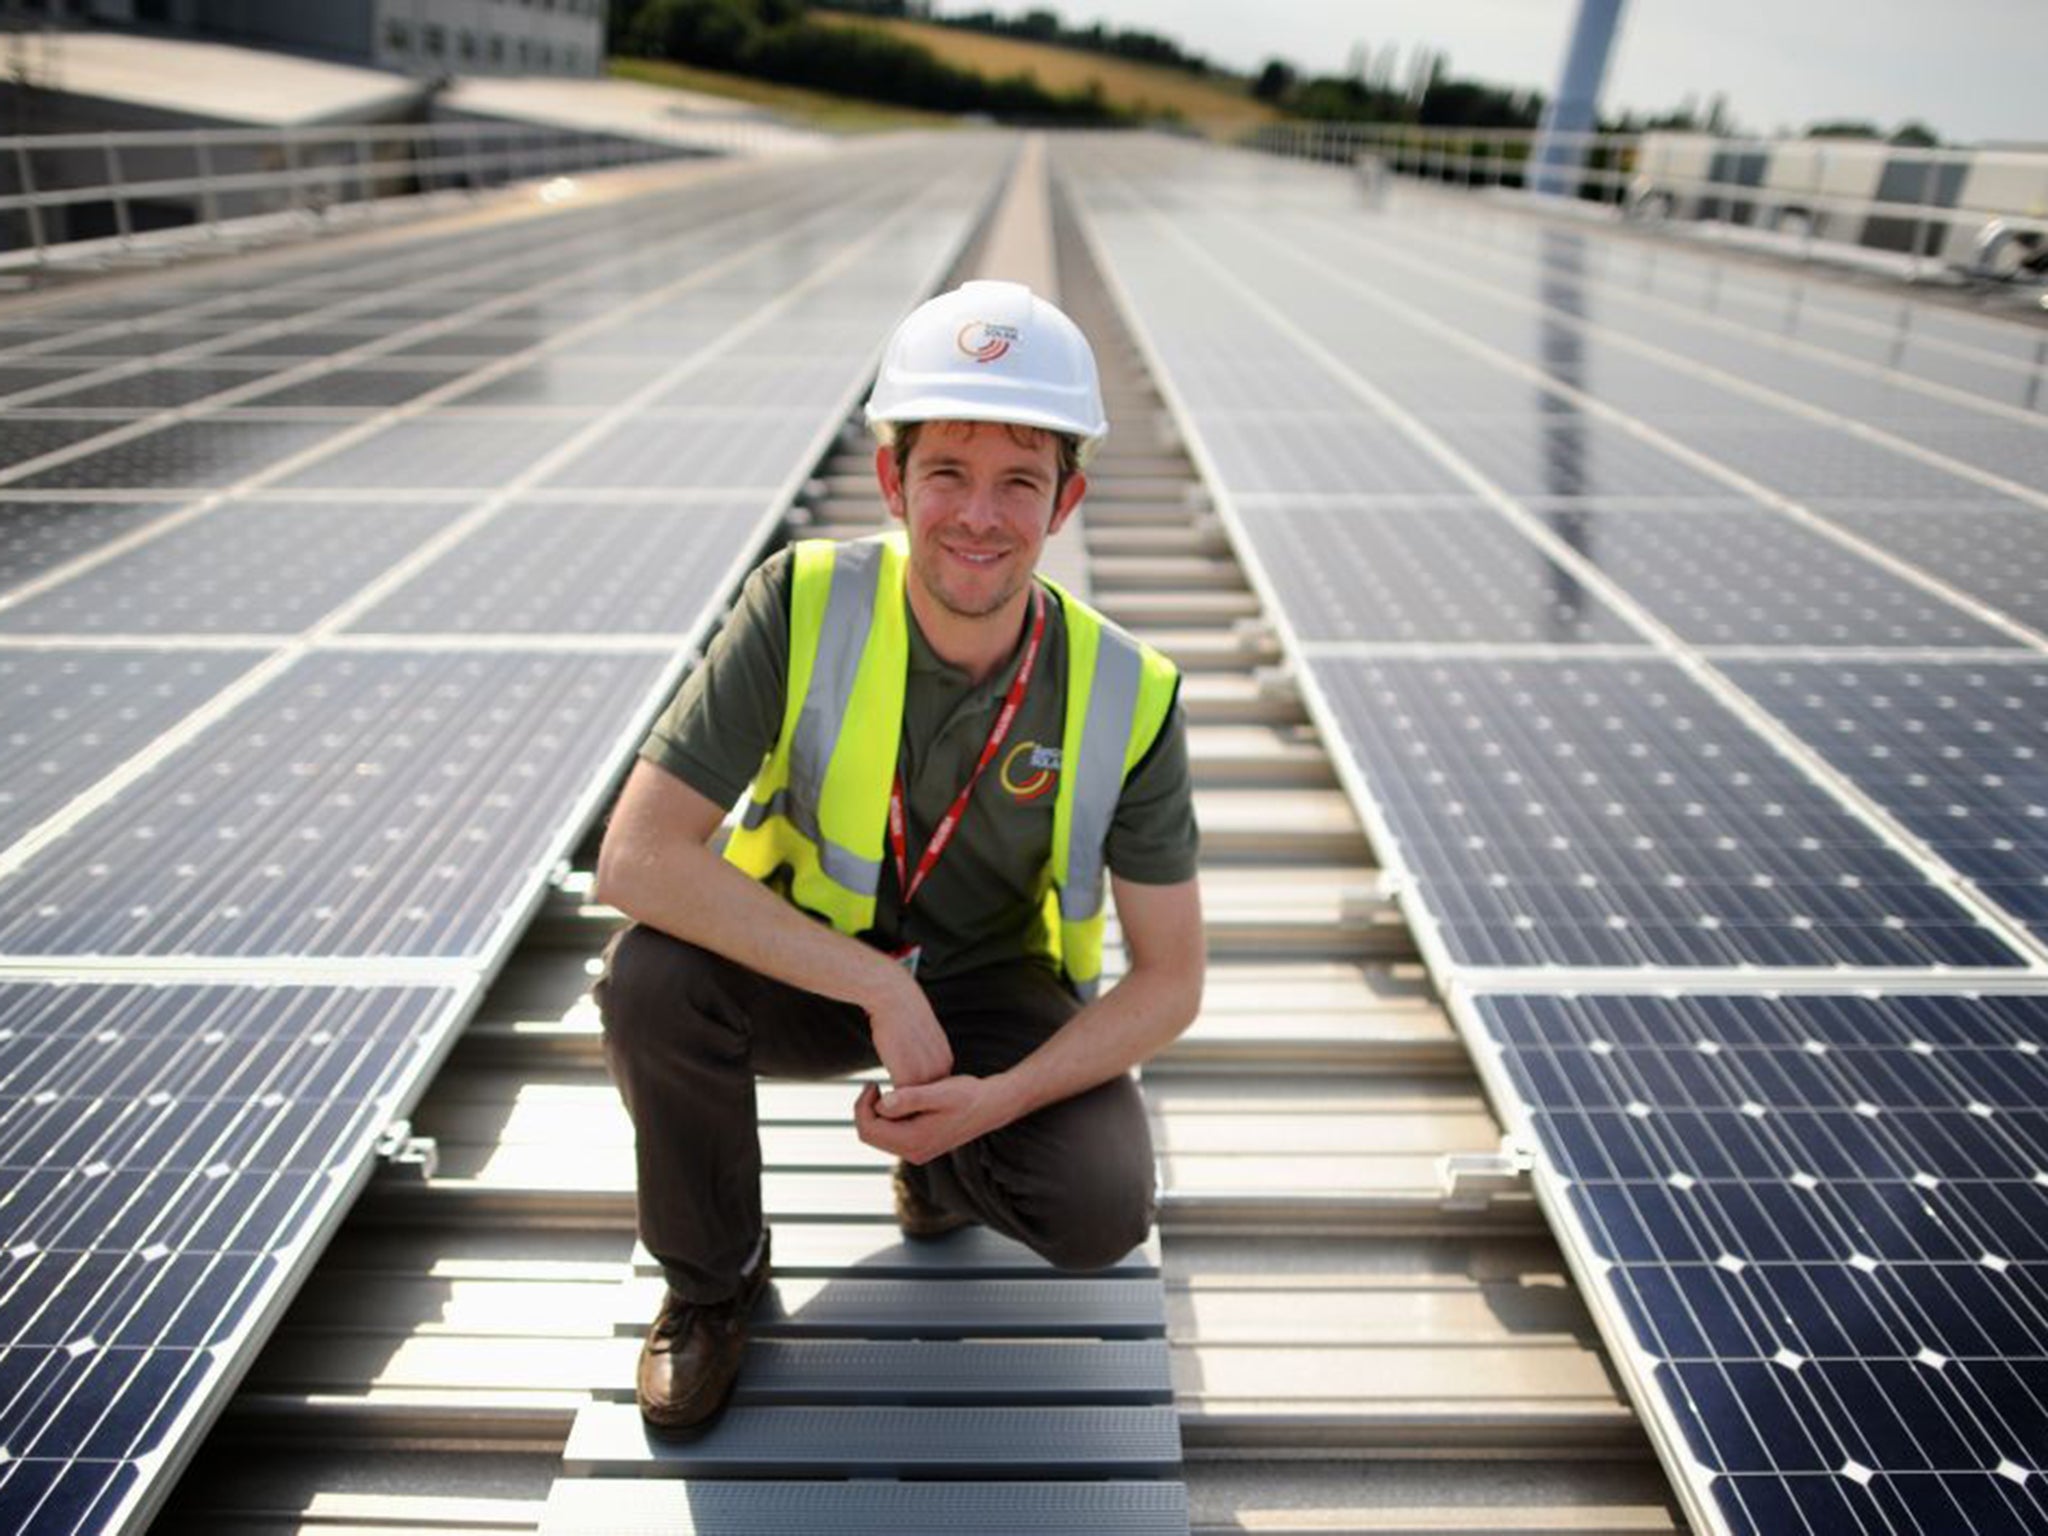 Gabriel Wondrausch started up his solar-panel design and installation company, SunGift Energy, 10 years ago. He is deeply concerned about the impact subsidy cuts could have on his firm and the renewable energy industry